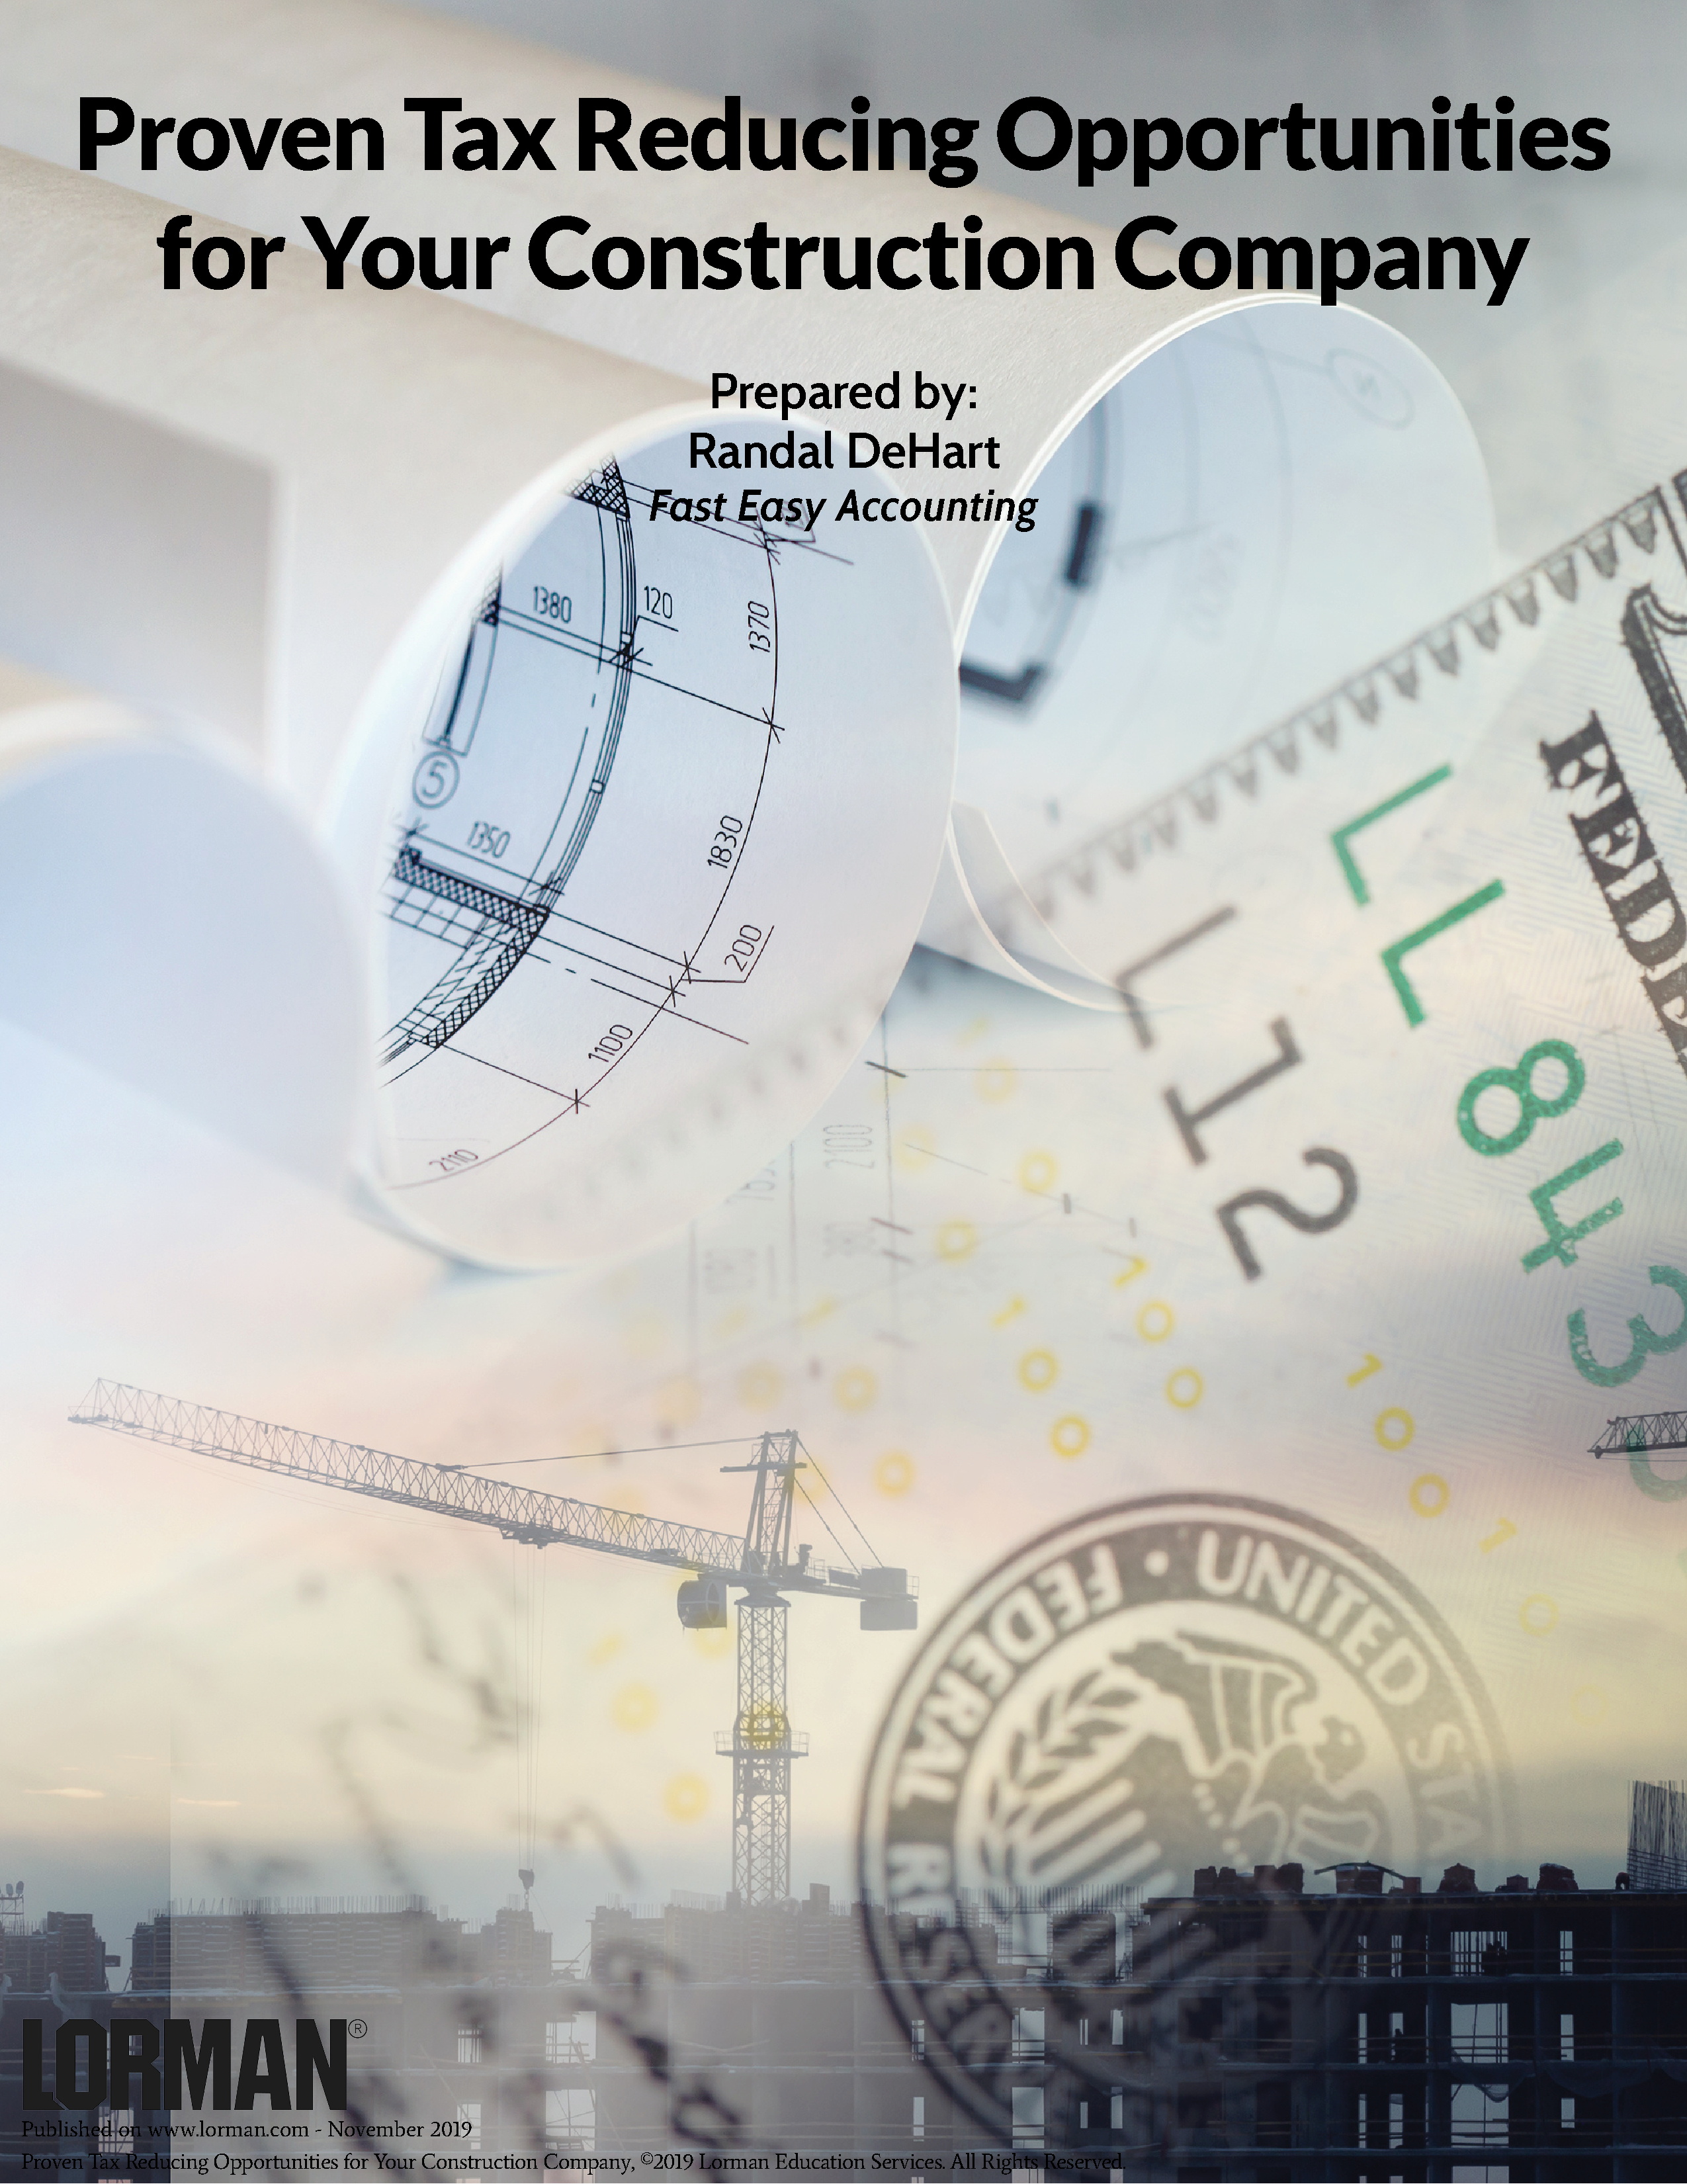 Proven Tax Reducing Opportunities for Your Construction Company